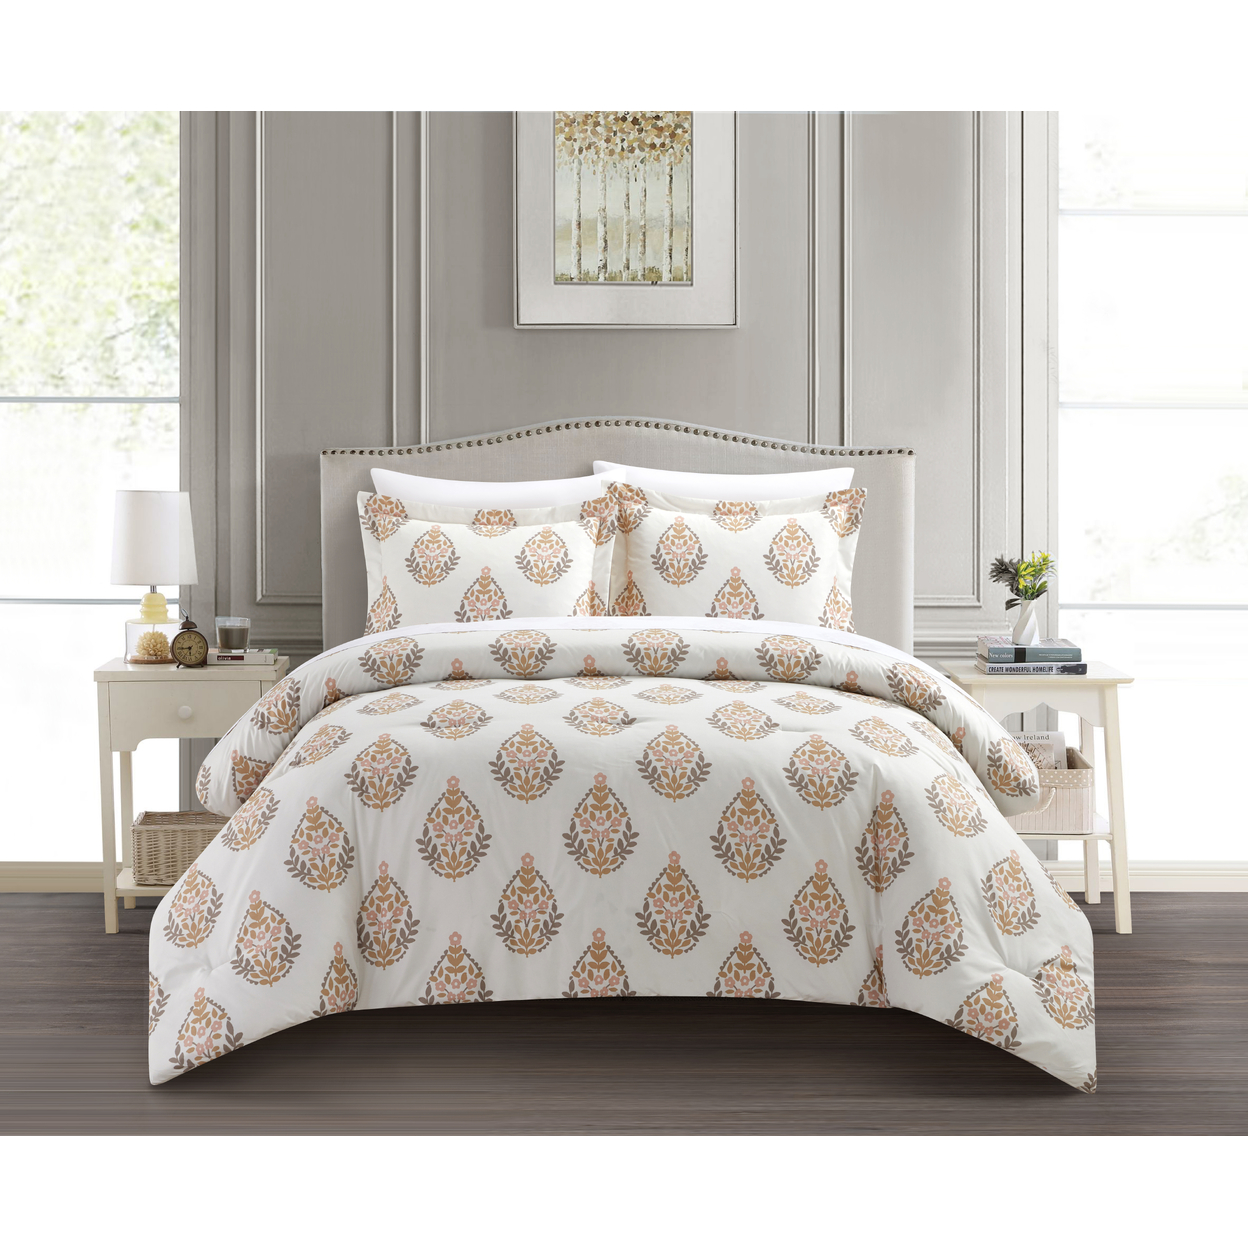 3 Or 2 Piece Duvet Cover Set Print Design With Zipper Closure - Adelia Taupe, Twin